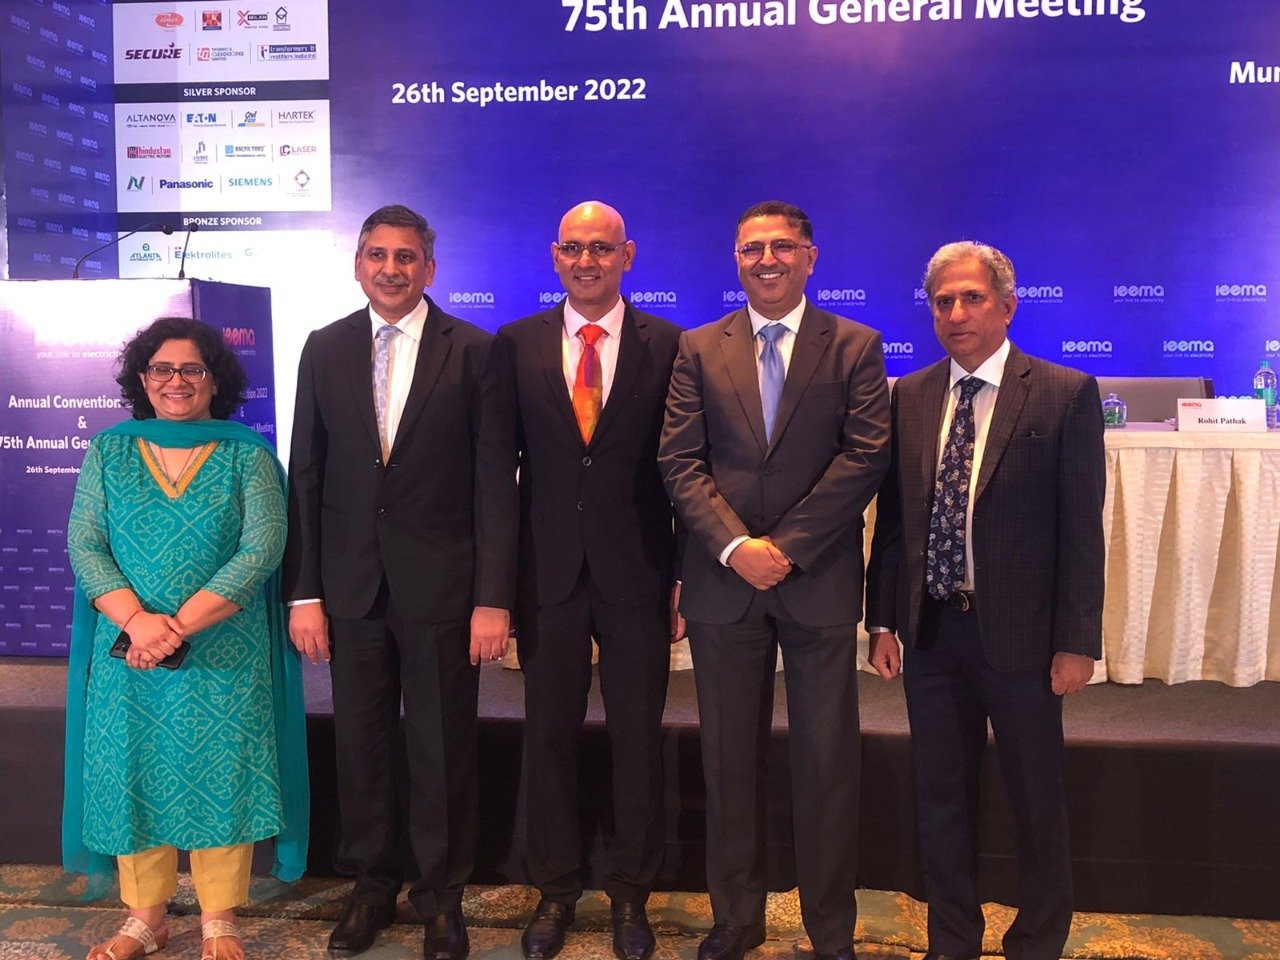 IEEMA appoints Rohit Pathak as the New President for 2022-23